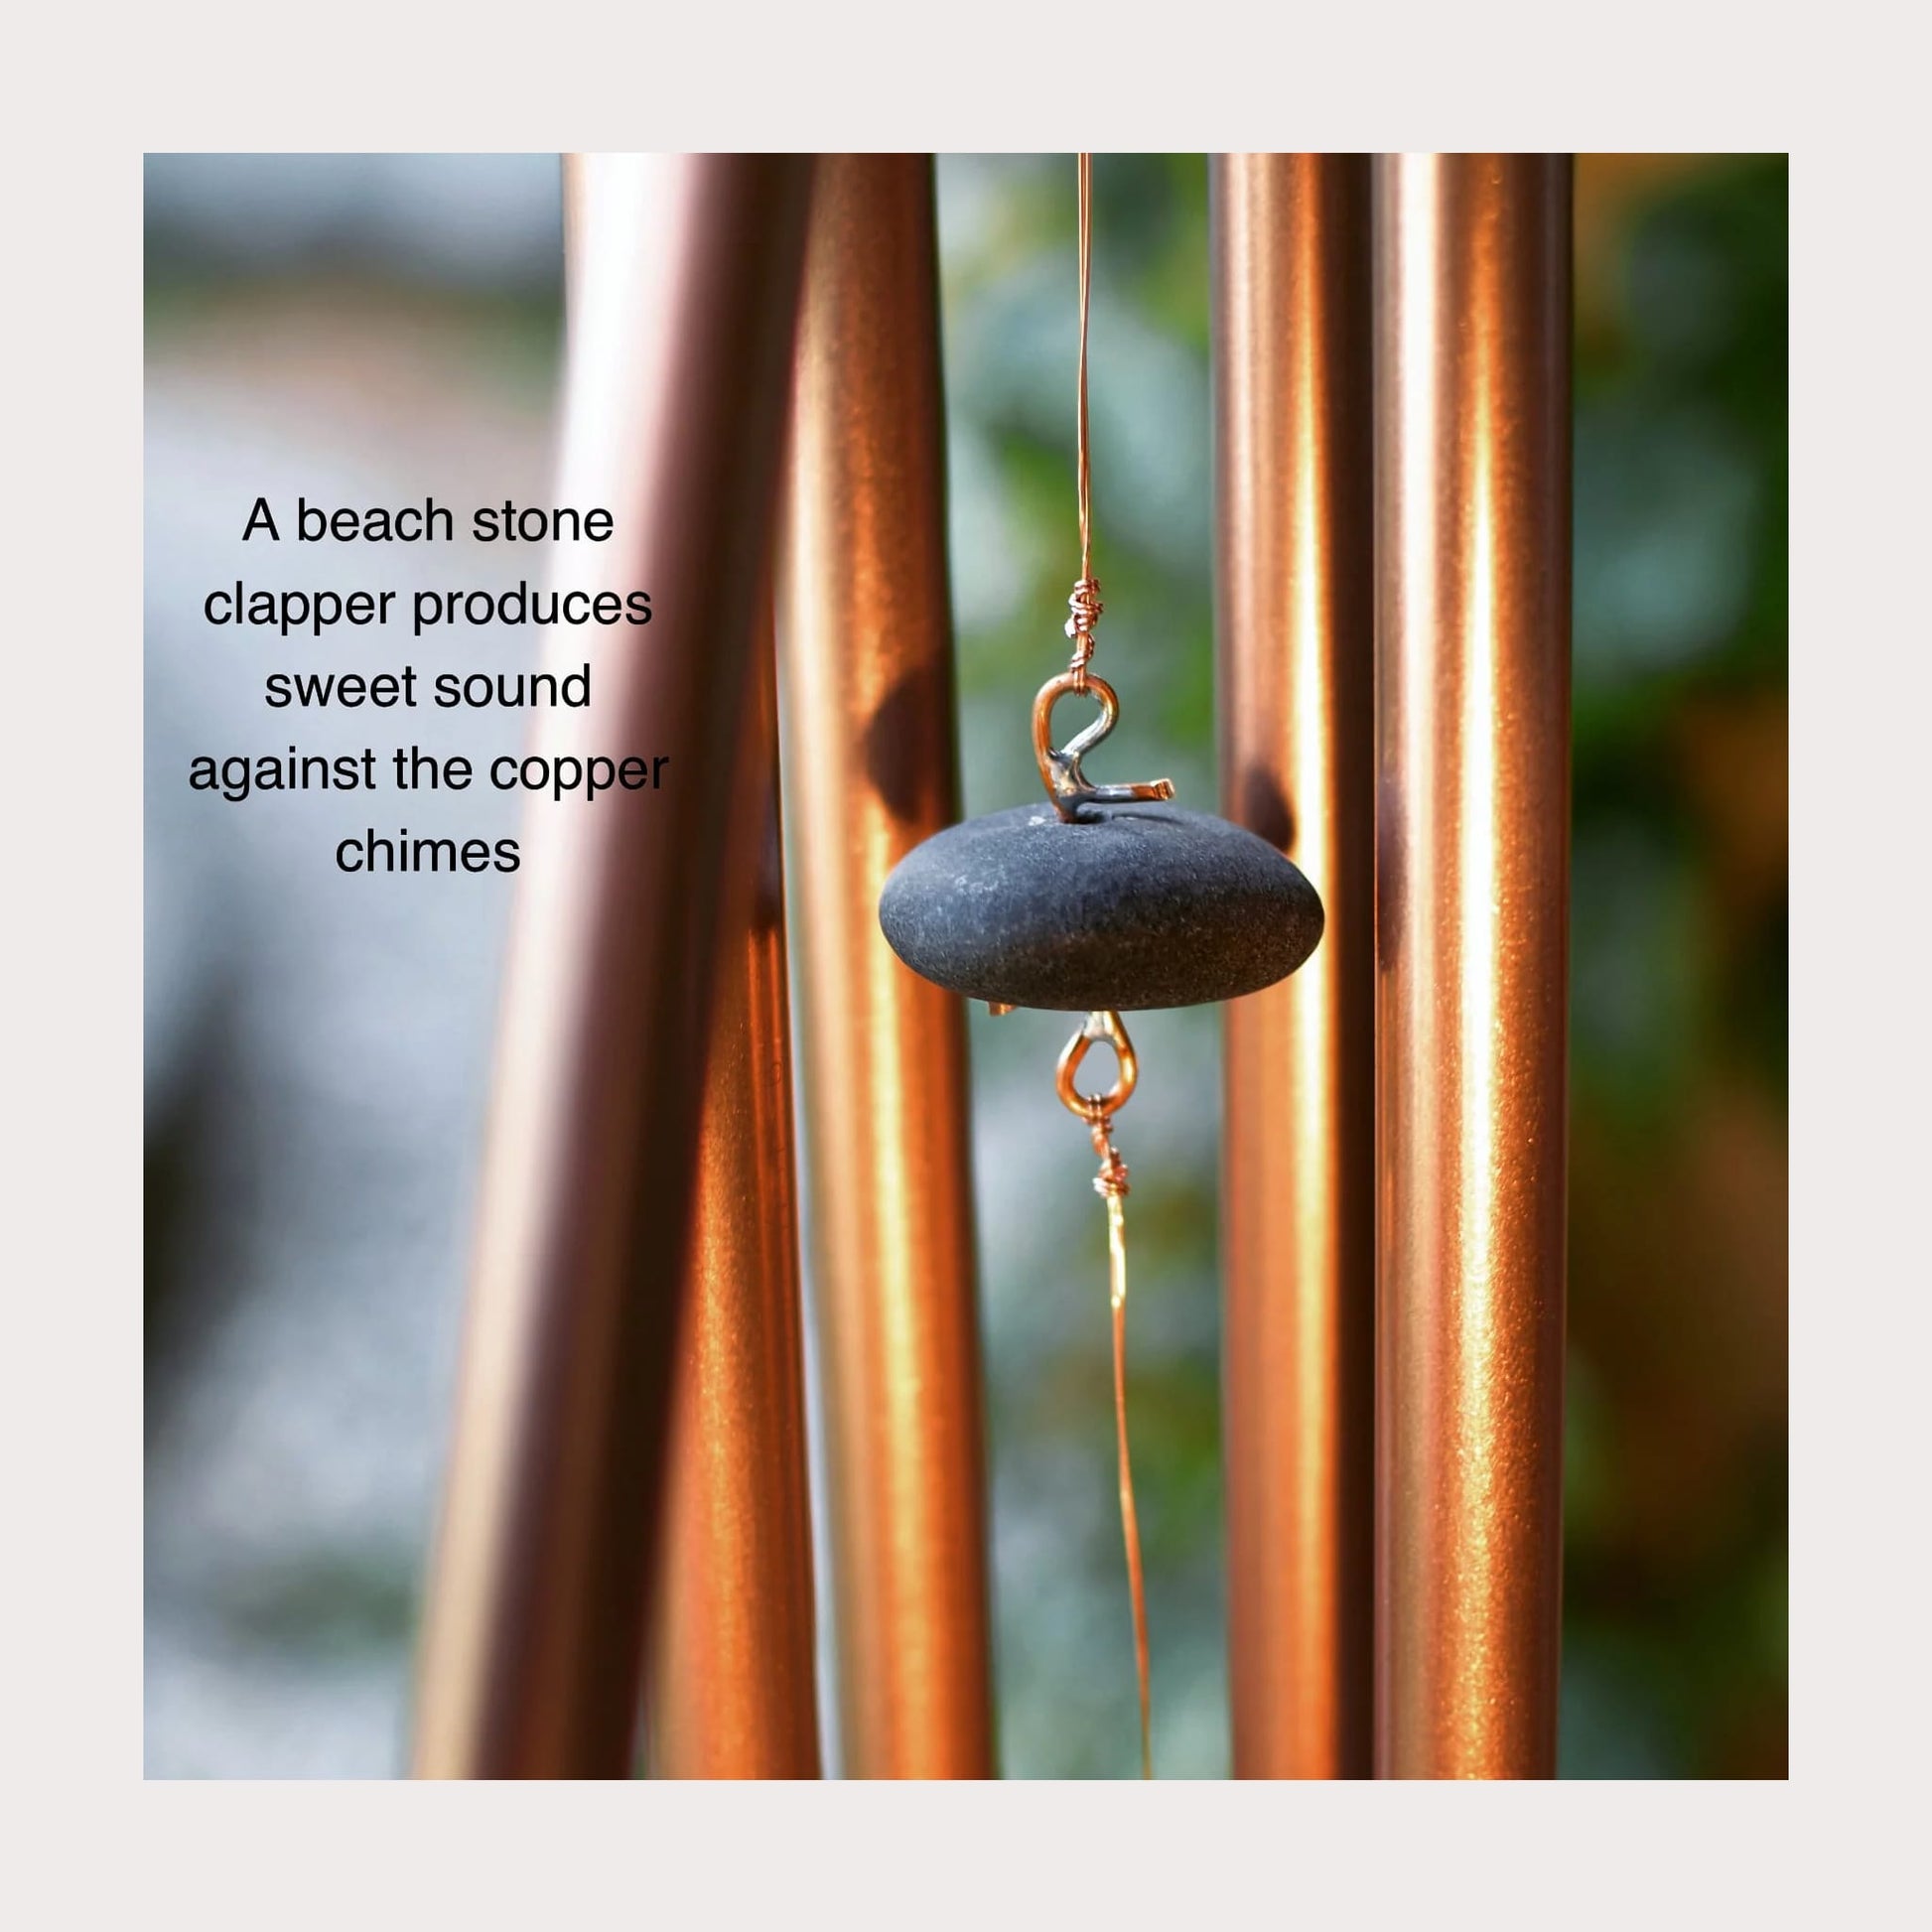 beach stone clapper, or striker, for a wind chime